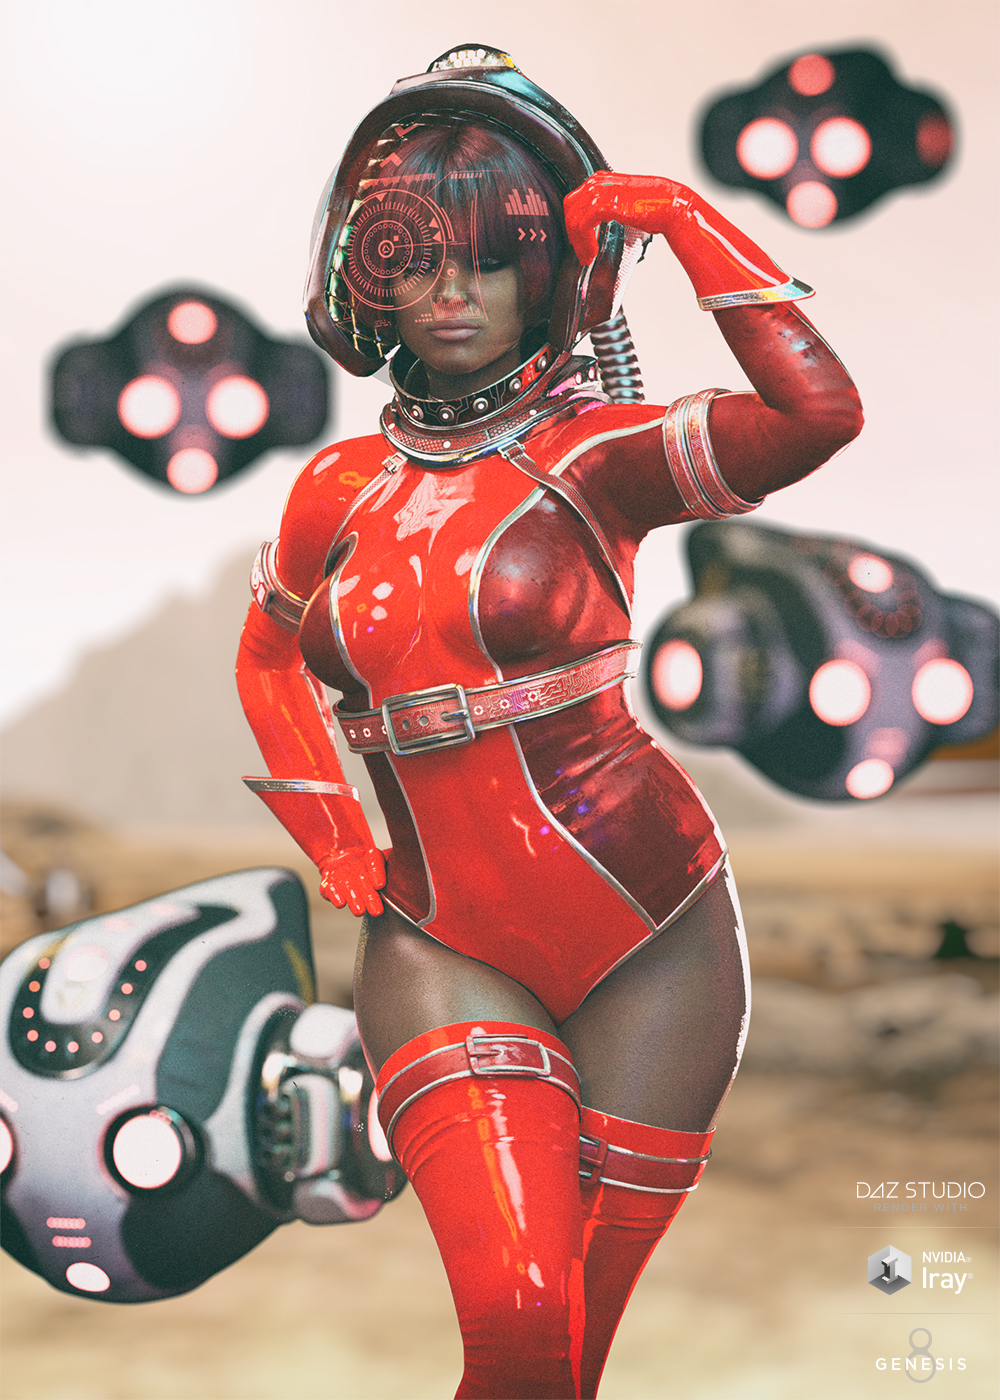 female space suit anime cosplay